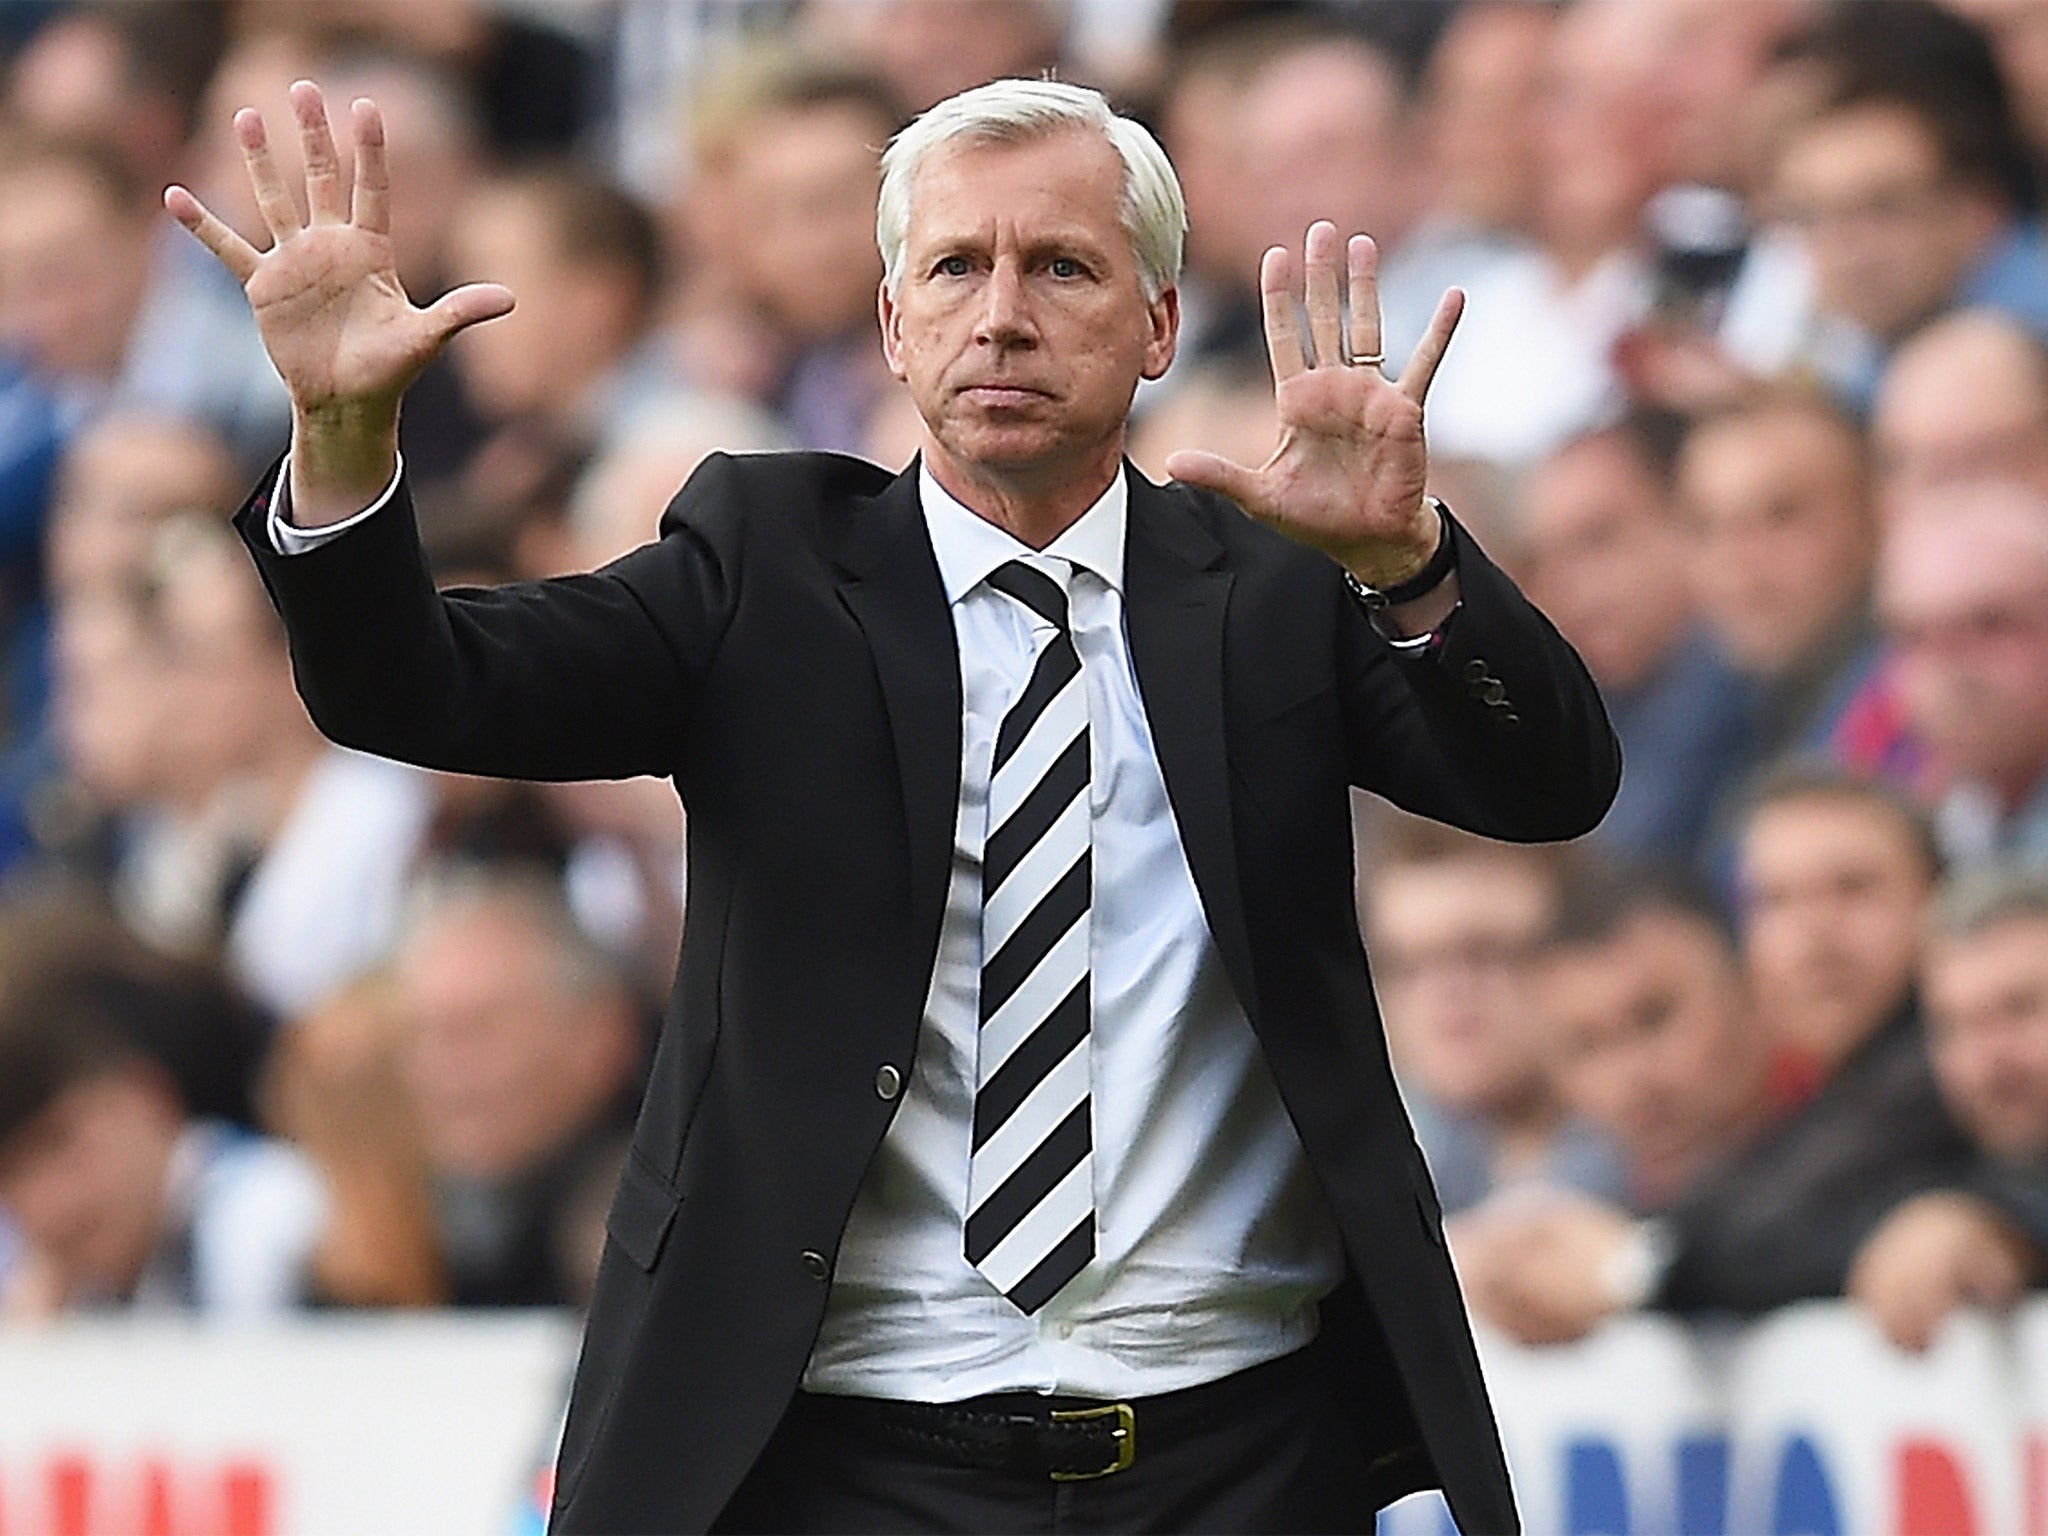 The Newcastle board has cooled towards Alan Pardew after a disappointing start to the season